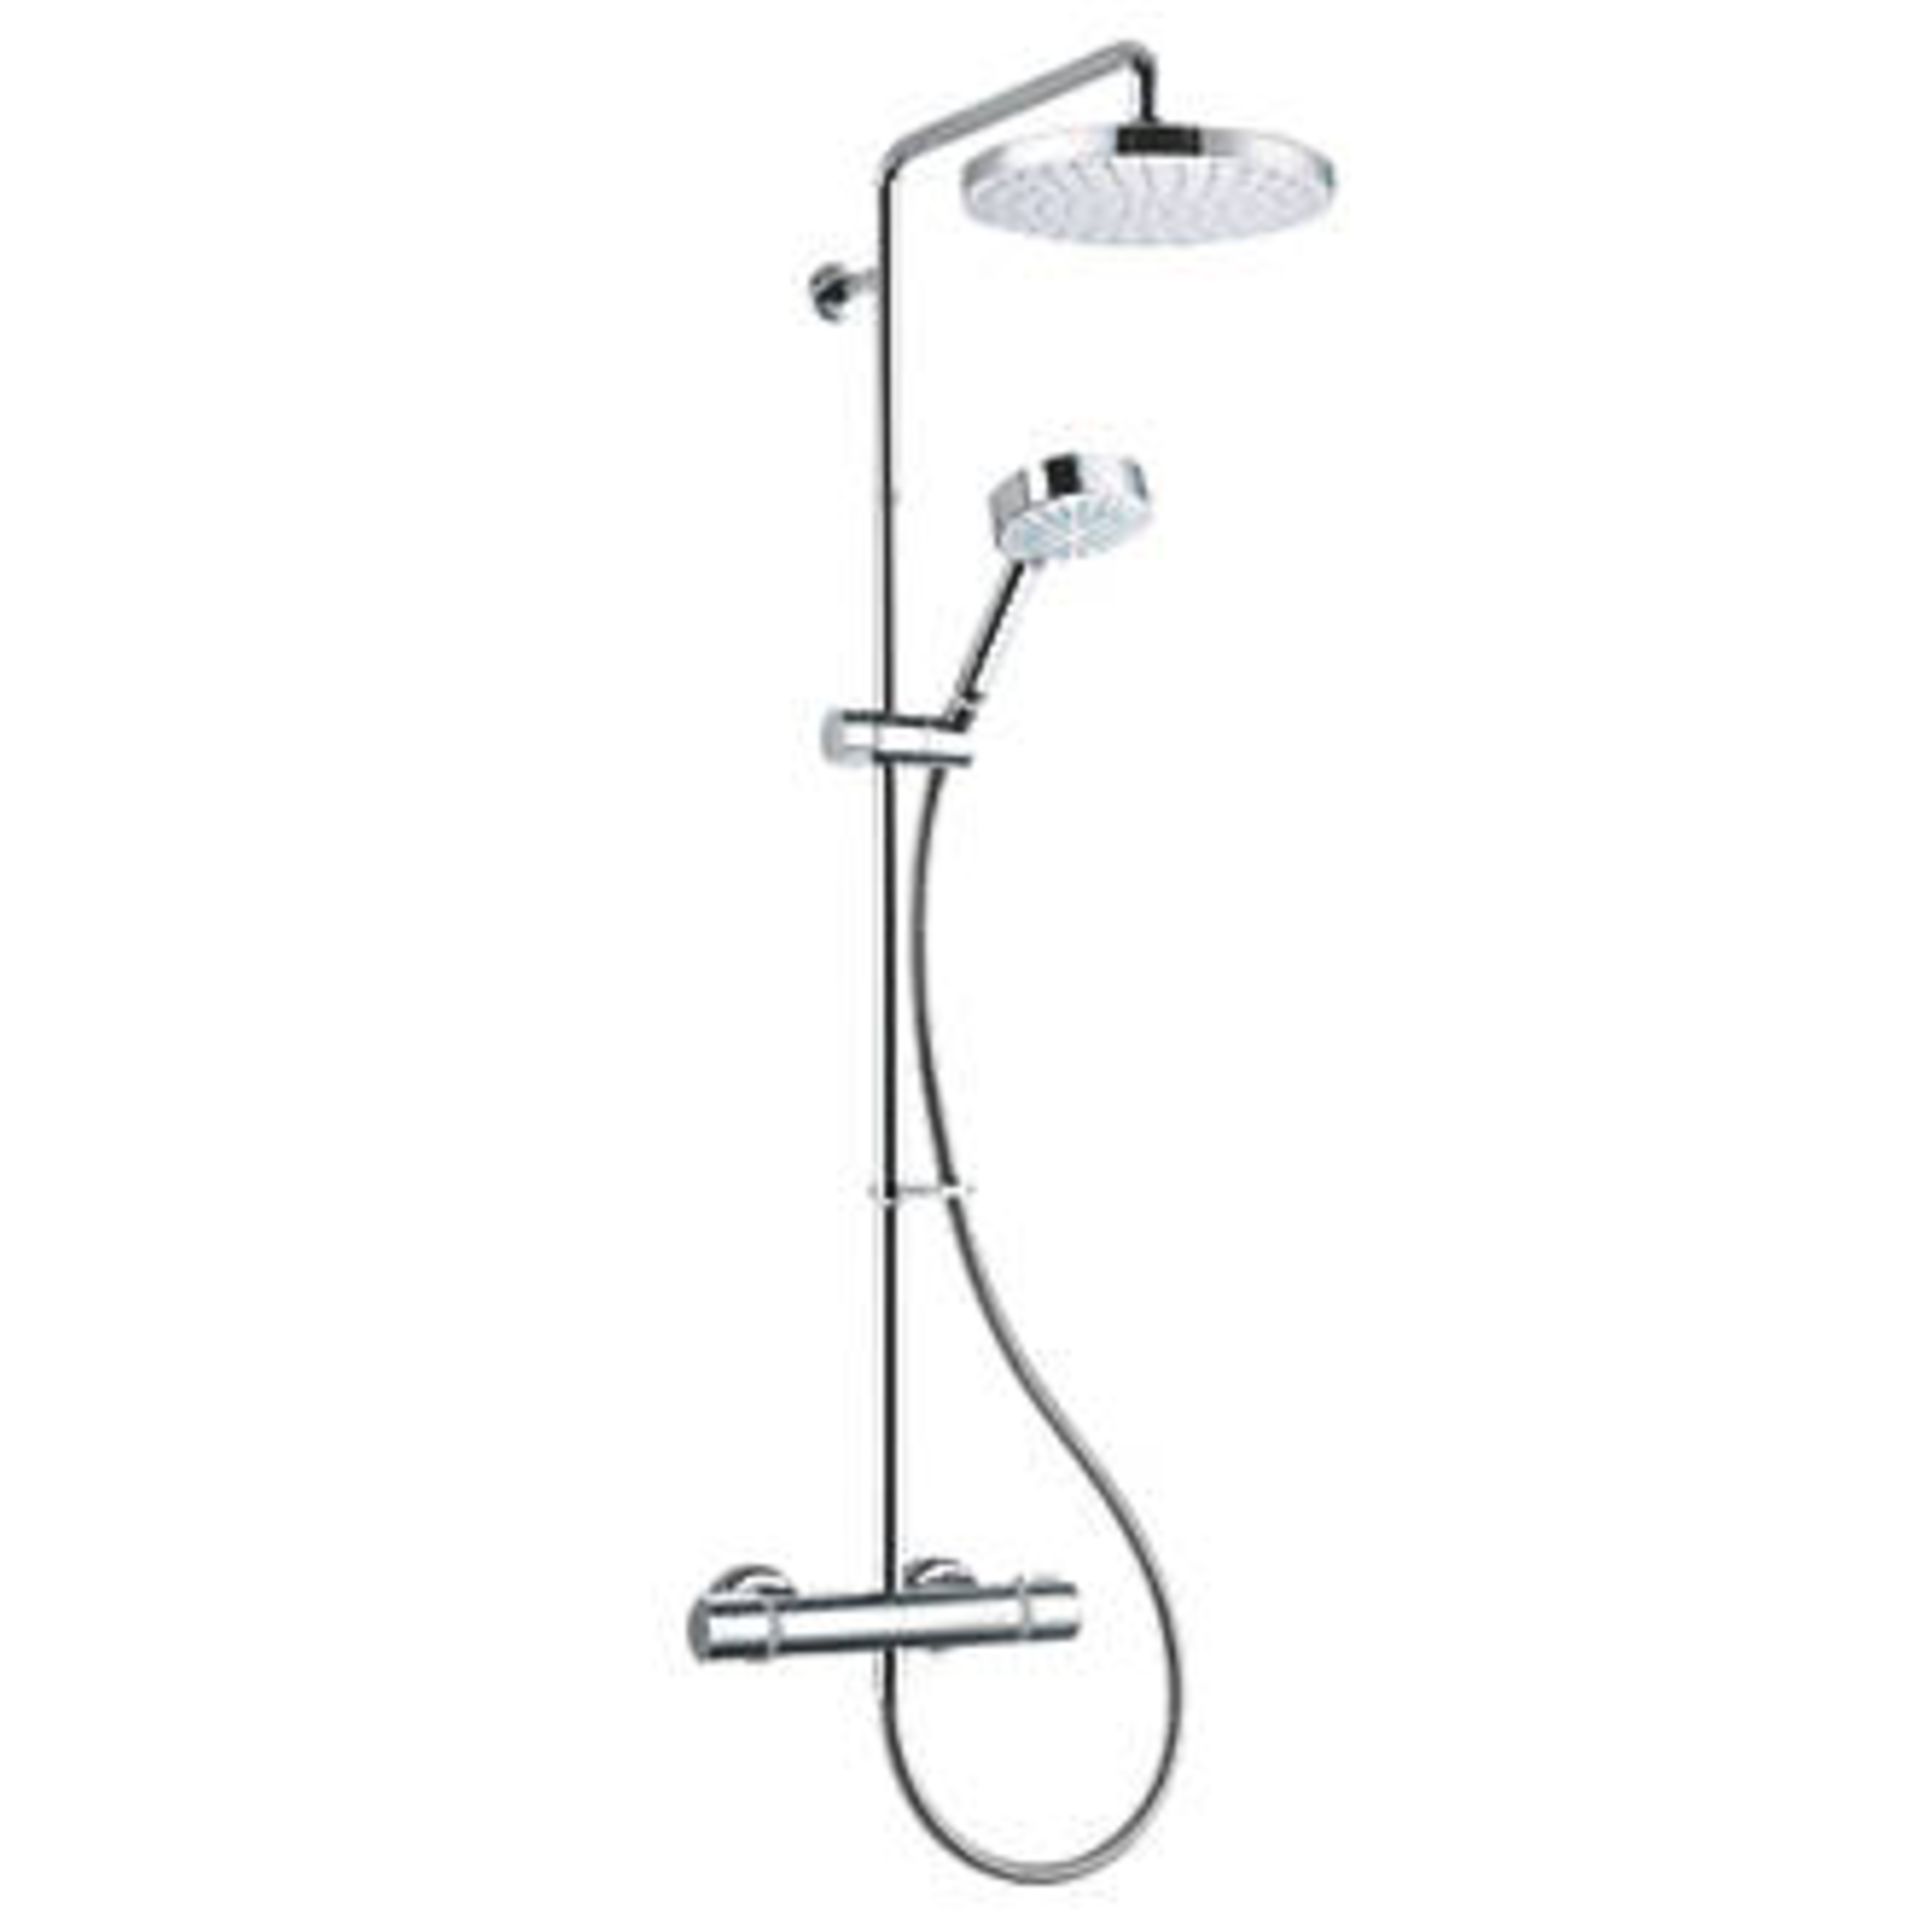 (XL64) Mira Atom ERD Rear-Fed Exposed Chrome Thermostatic Mixer Shower. RRP £389.99. Thermosta... - Image 3 of 3